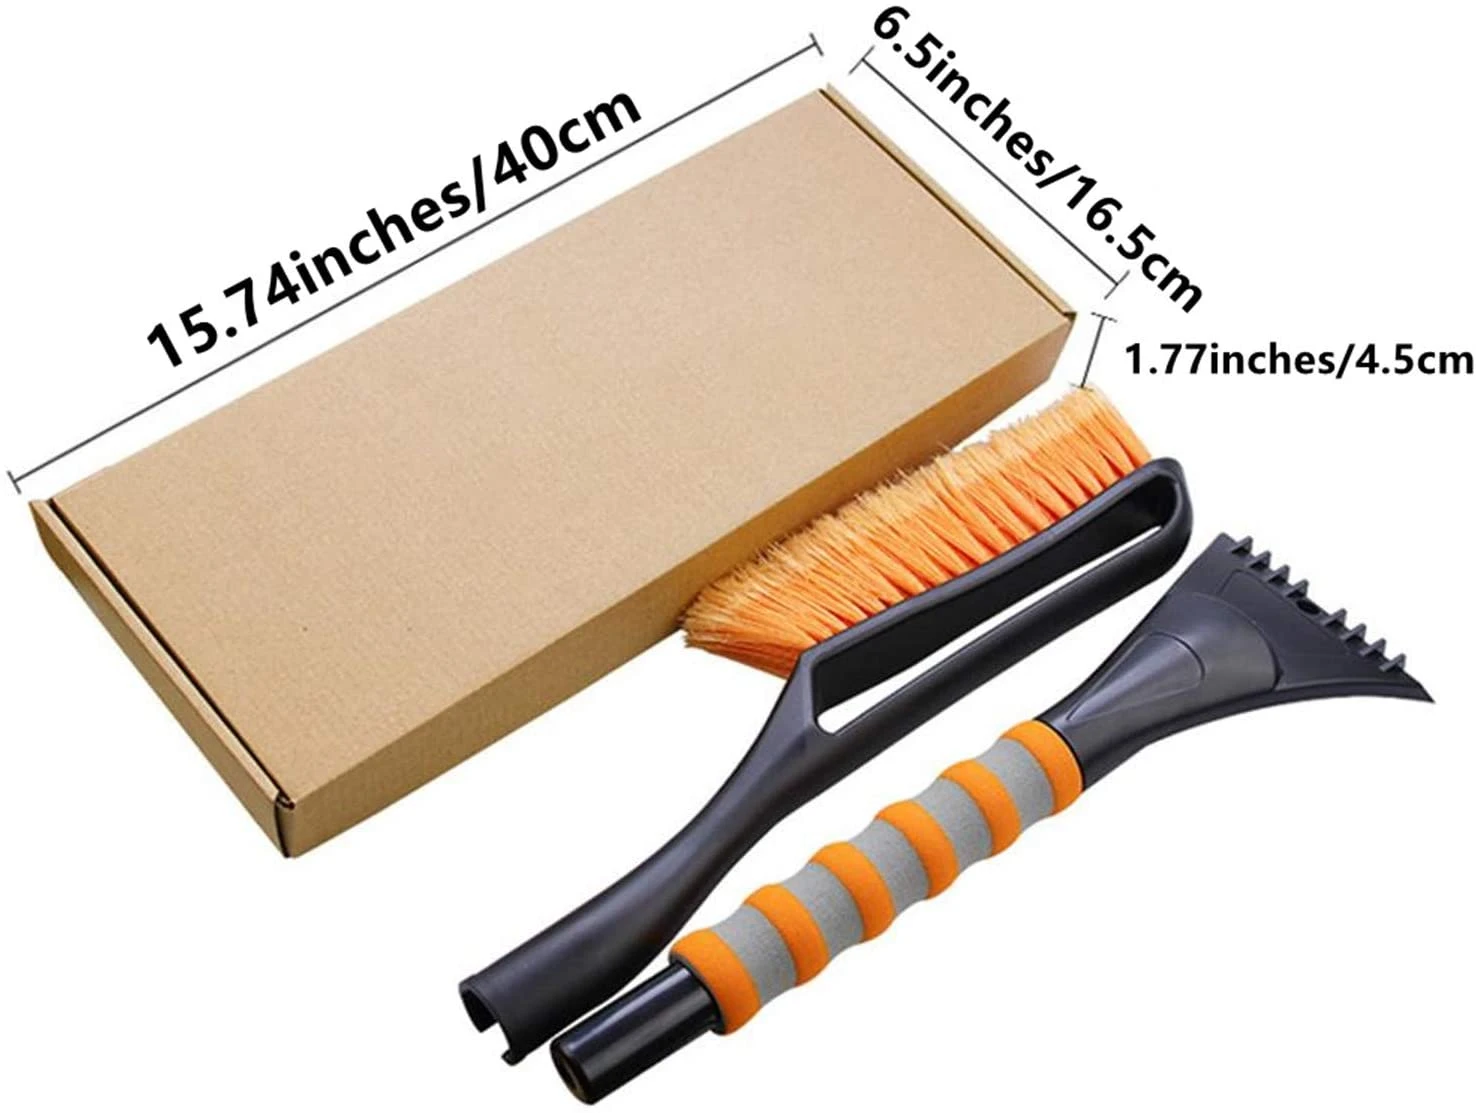 Car cleaning snow brush 51 inch detachable extendable snow broom snow brush with scraper squeegee Car Truck SUV